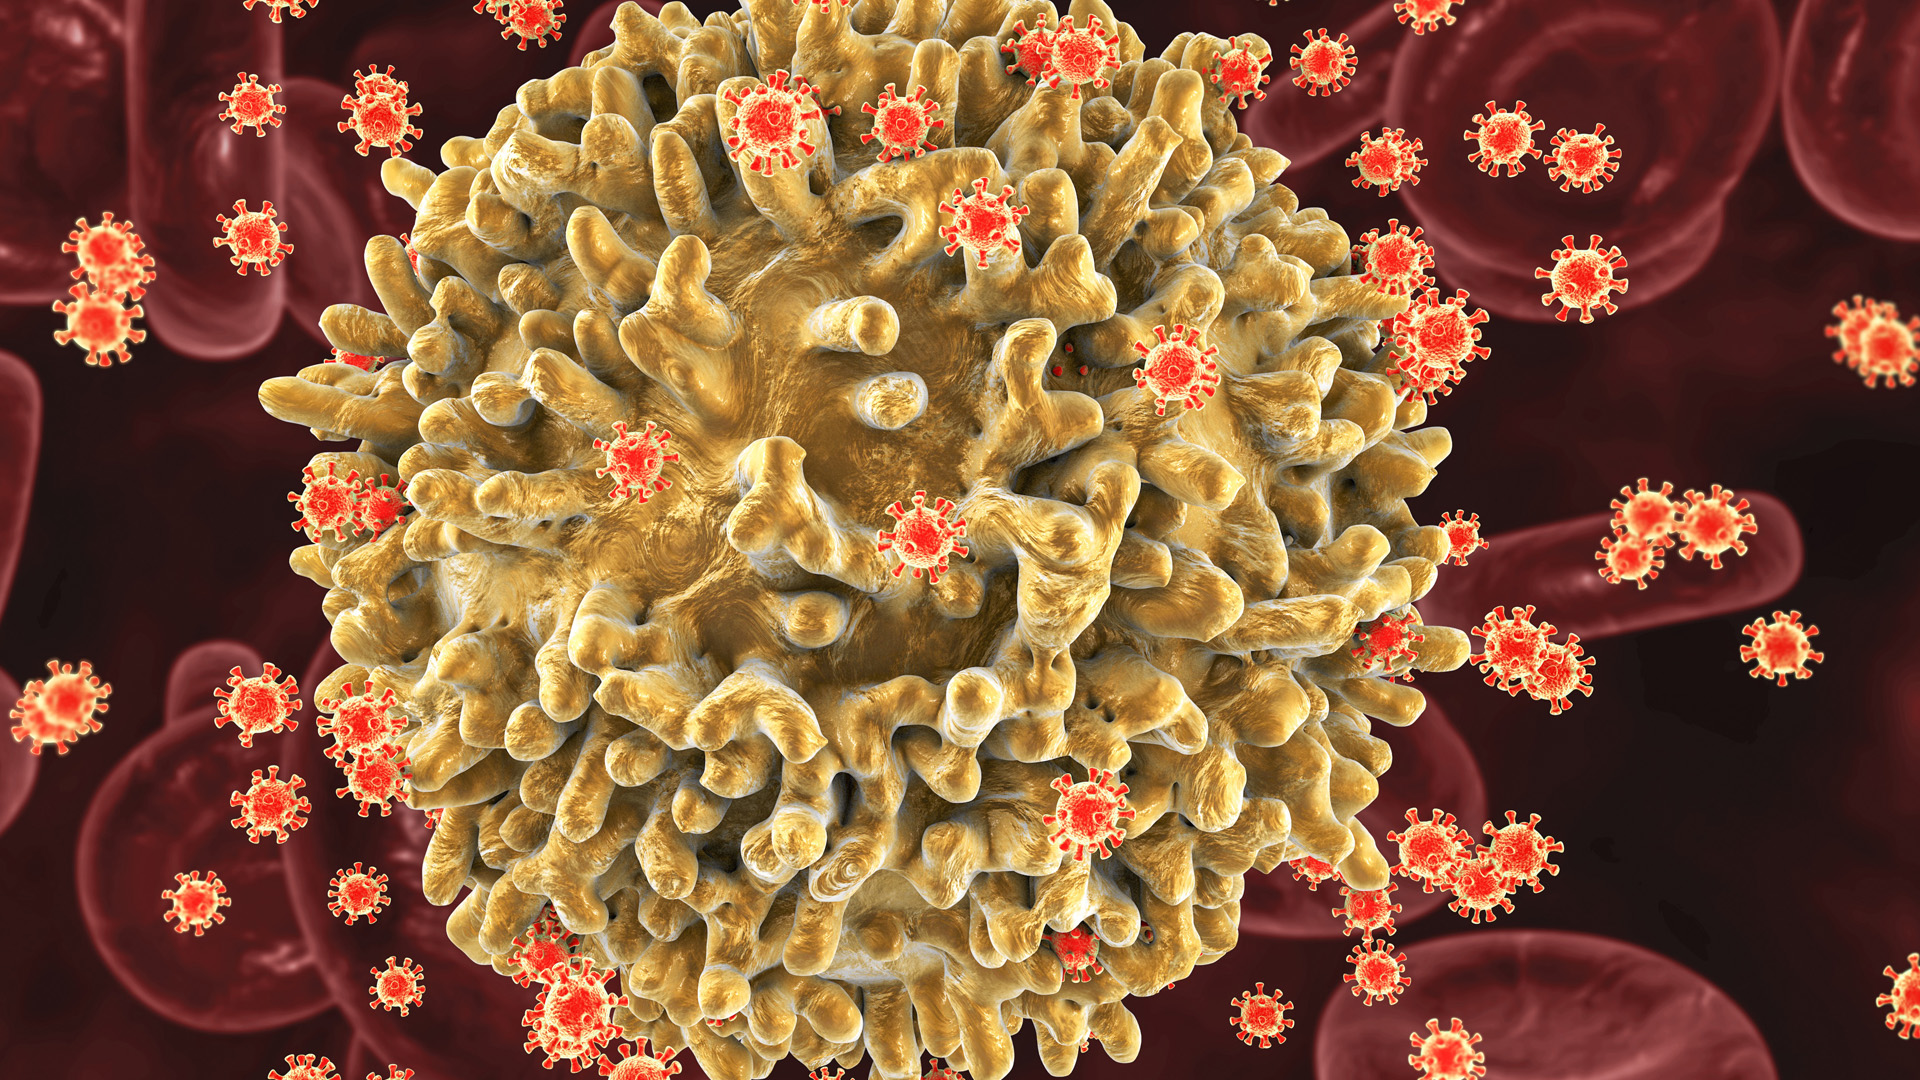 Finding an HIV Drug’s Mechanism of Action